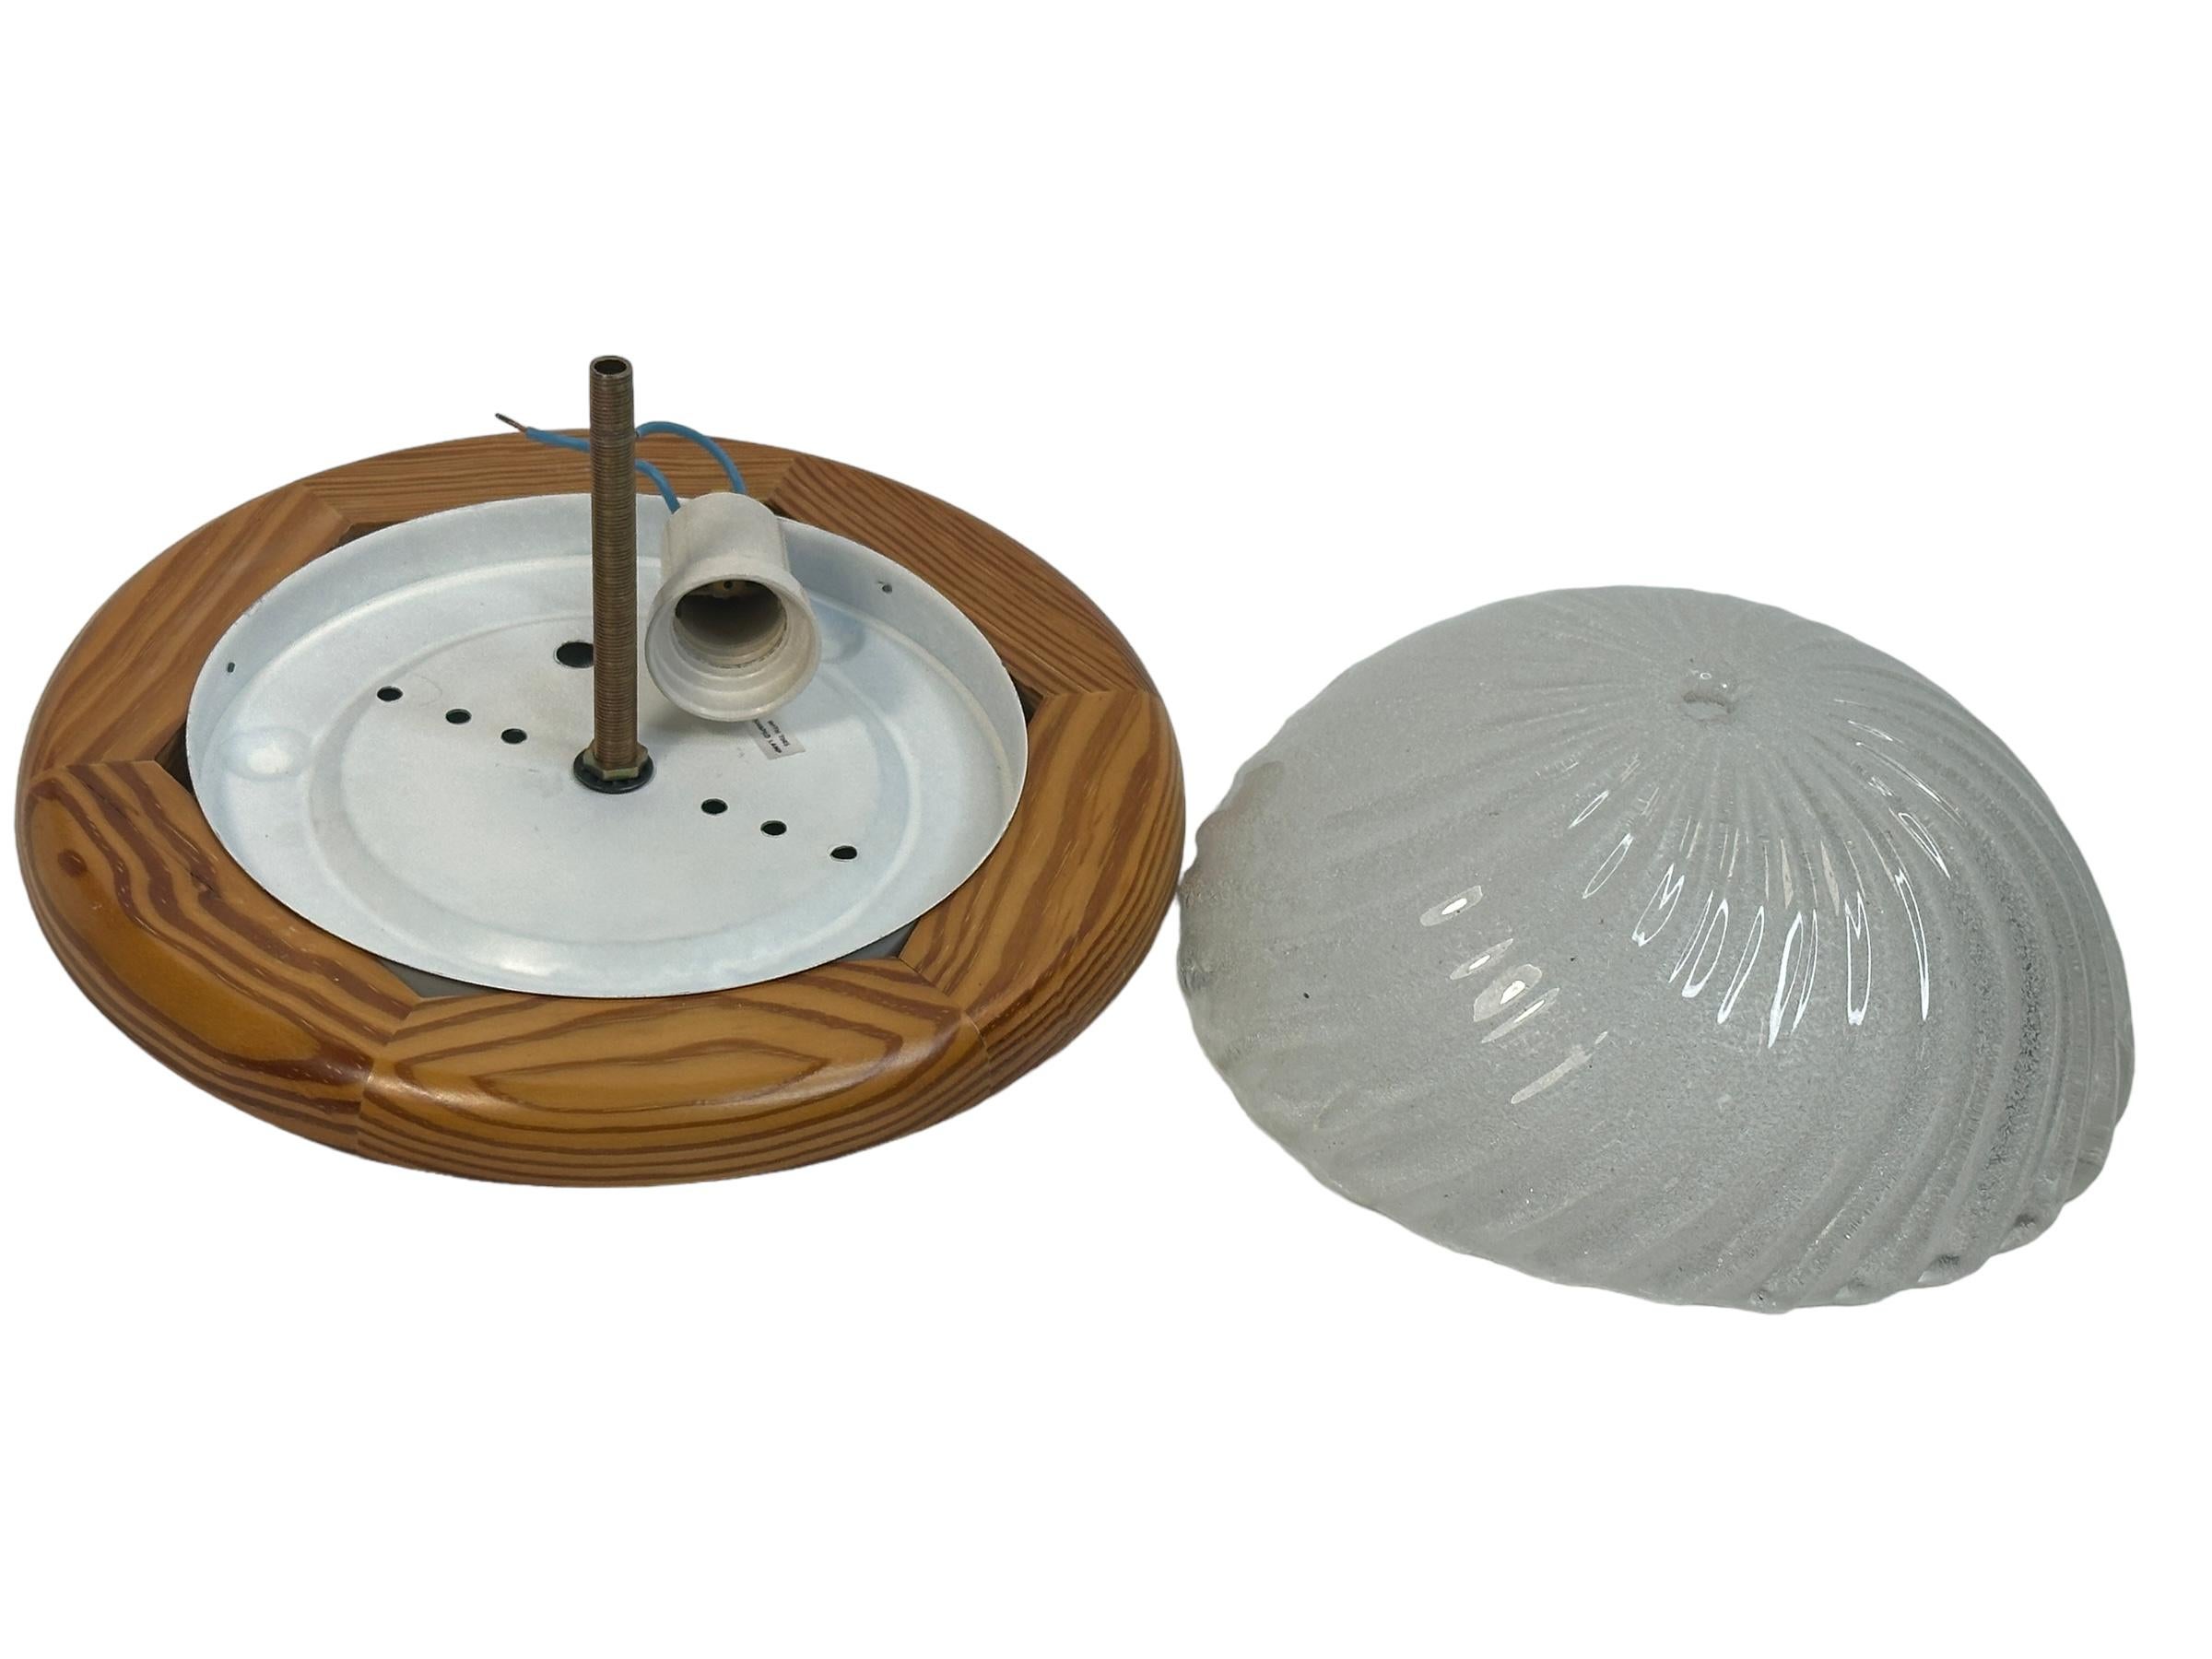 Starburst Pattern Ice Glass and Wood, Flush Mount Ceiling Light, Austria, 1970s For Sale 1